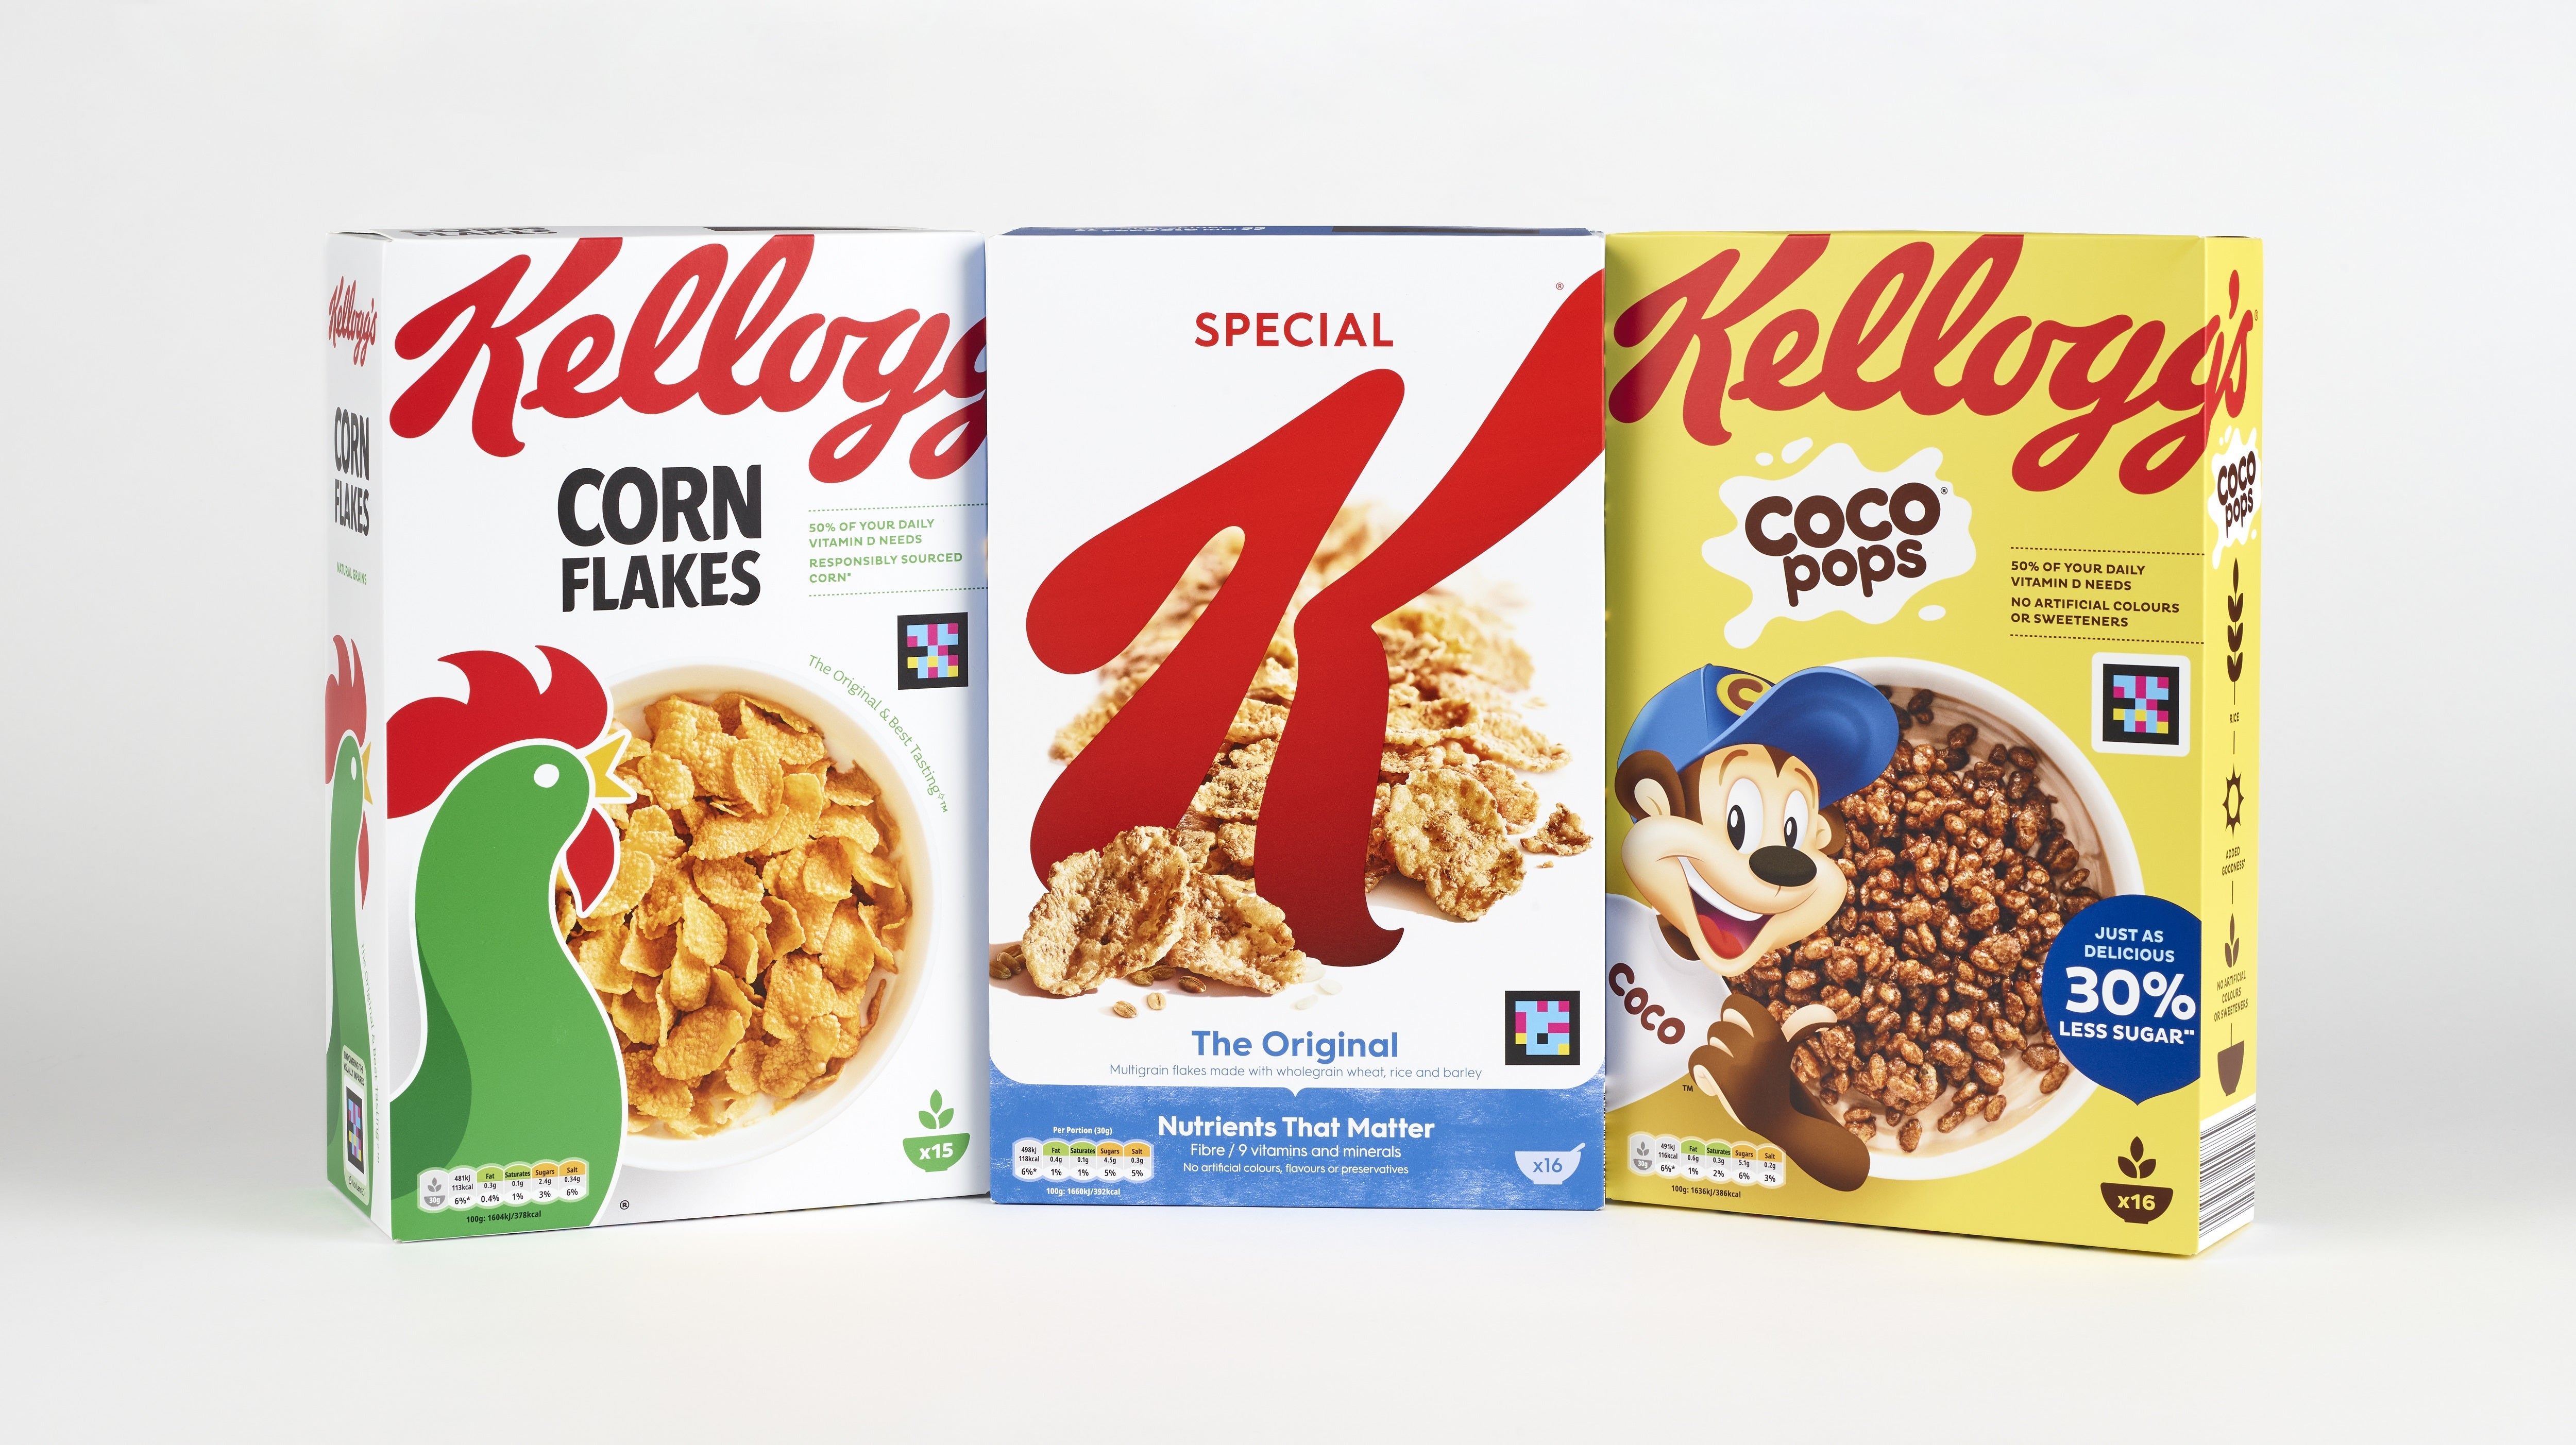 Kellogg’s is mounting a legal challenge against new Government rules which would stop some of the company’s cereals being prominently displayed in food stores (JKellogg’s/PA)